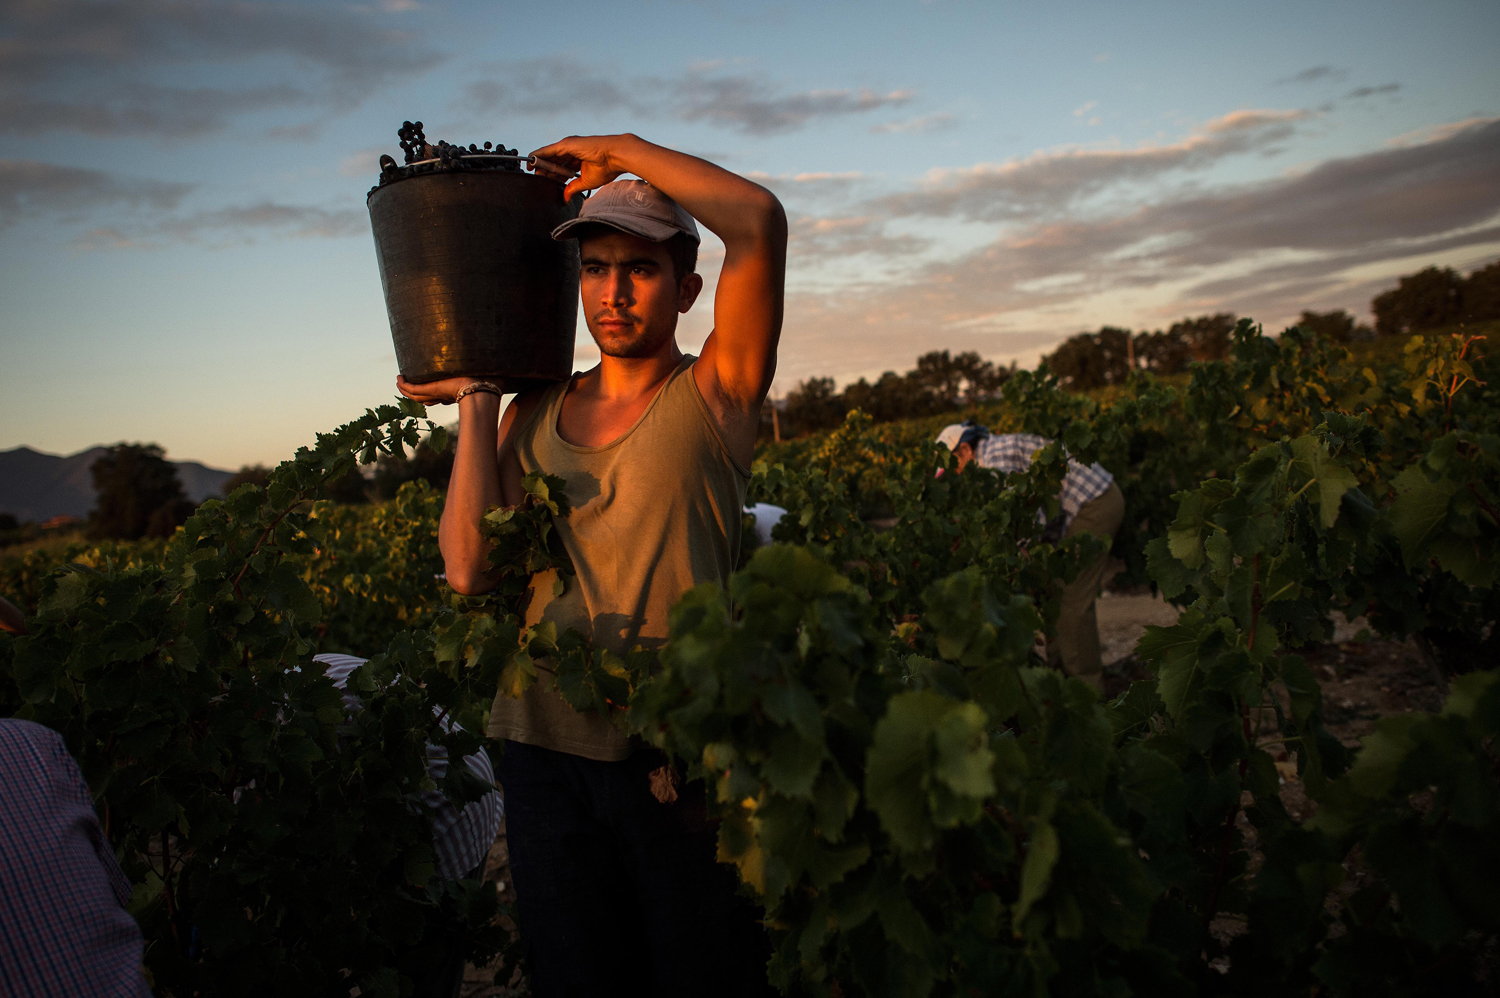 Antonio Garcia, 26, carries a bucket full of clusters of grapes at a wineyard of Chateau Planeres on Aug. 28, 2014 in Perpignan, France.